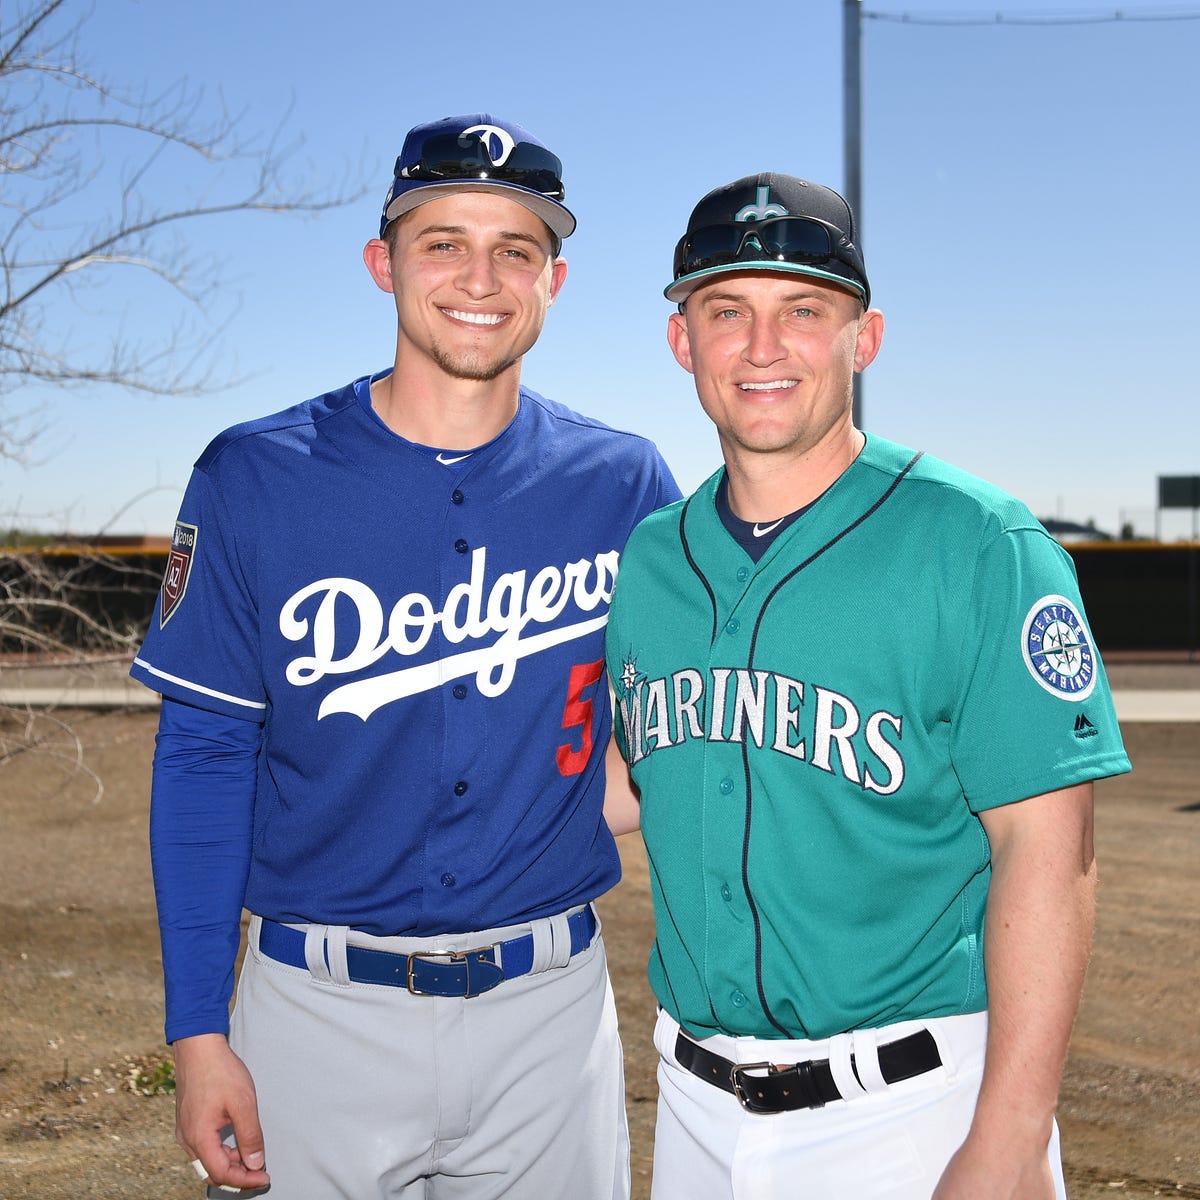 Corey and Kyle Seager are excited to finally face each other in MLB matchup, by Rowan Kavner